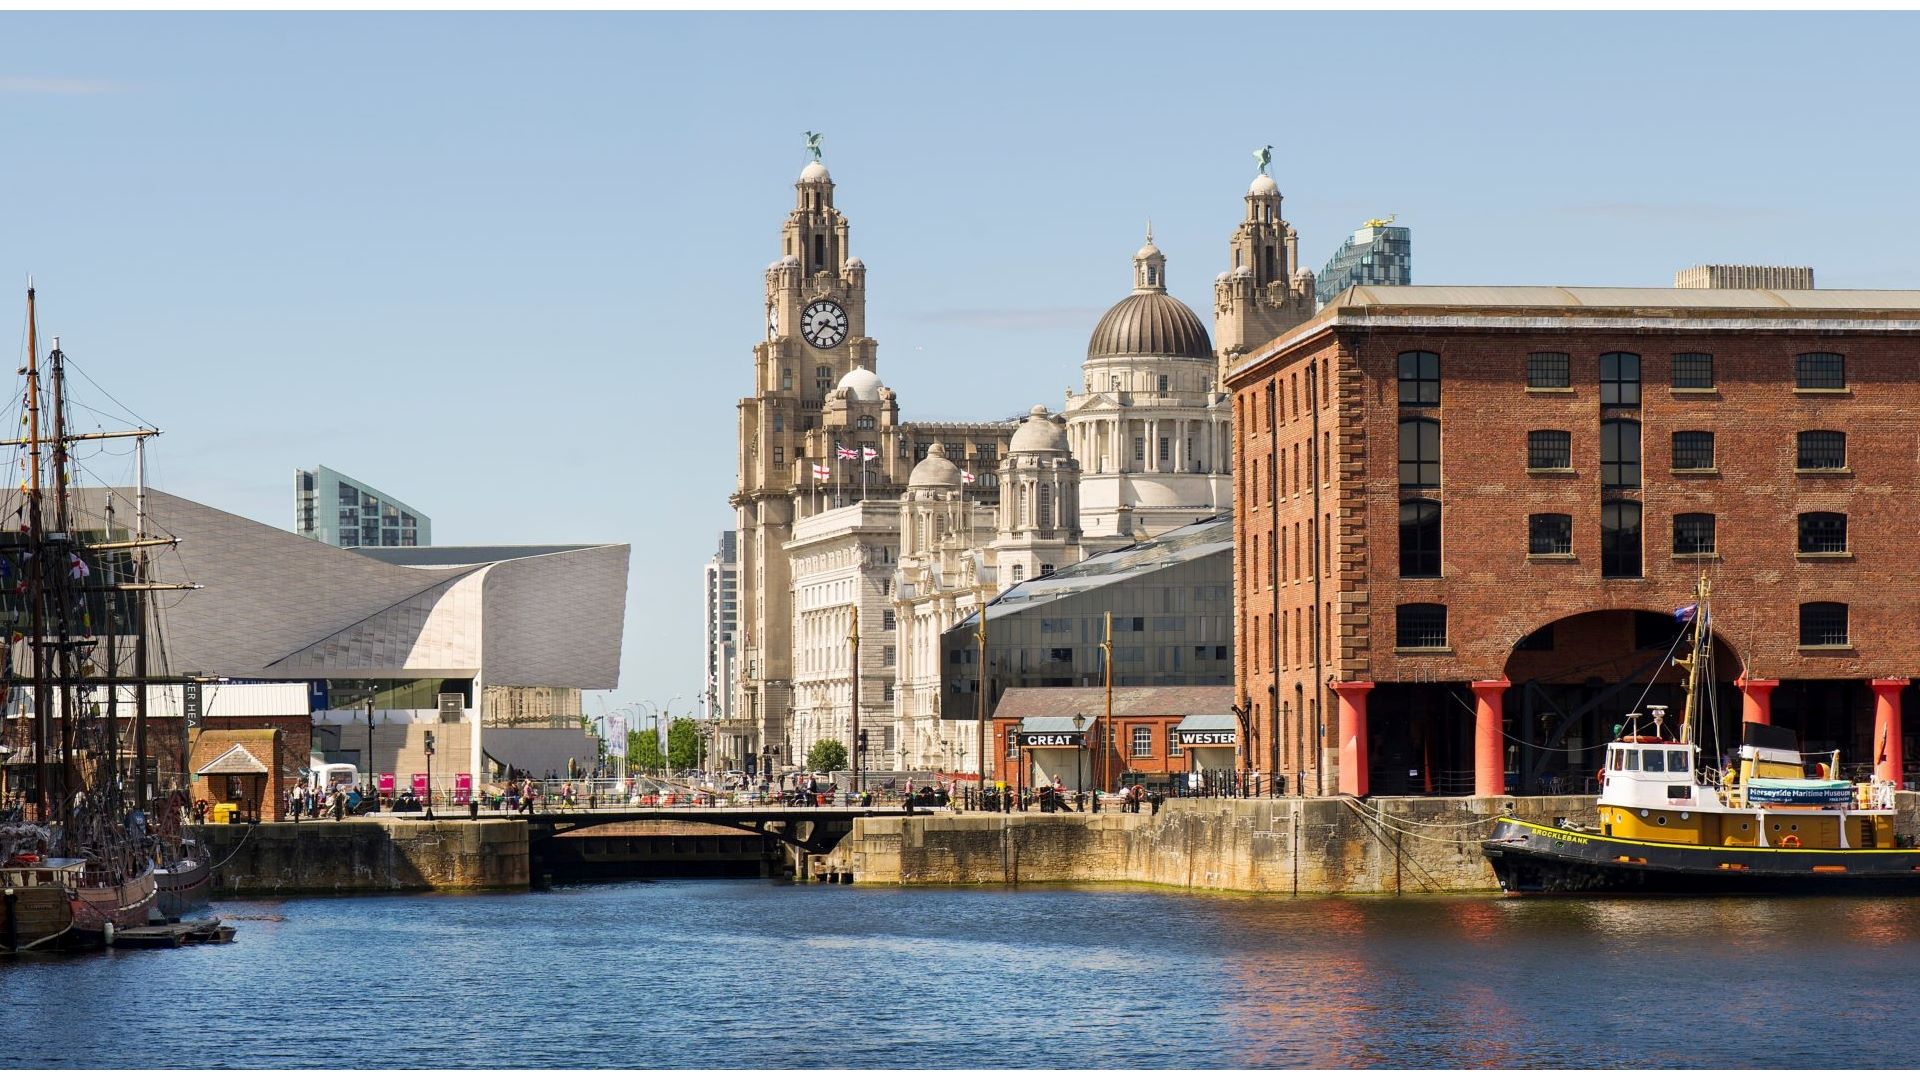 An image of the docks in Liverpool, featuring multiple large buildings, including the 3 graces and the museum of liverpool